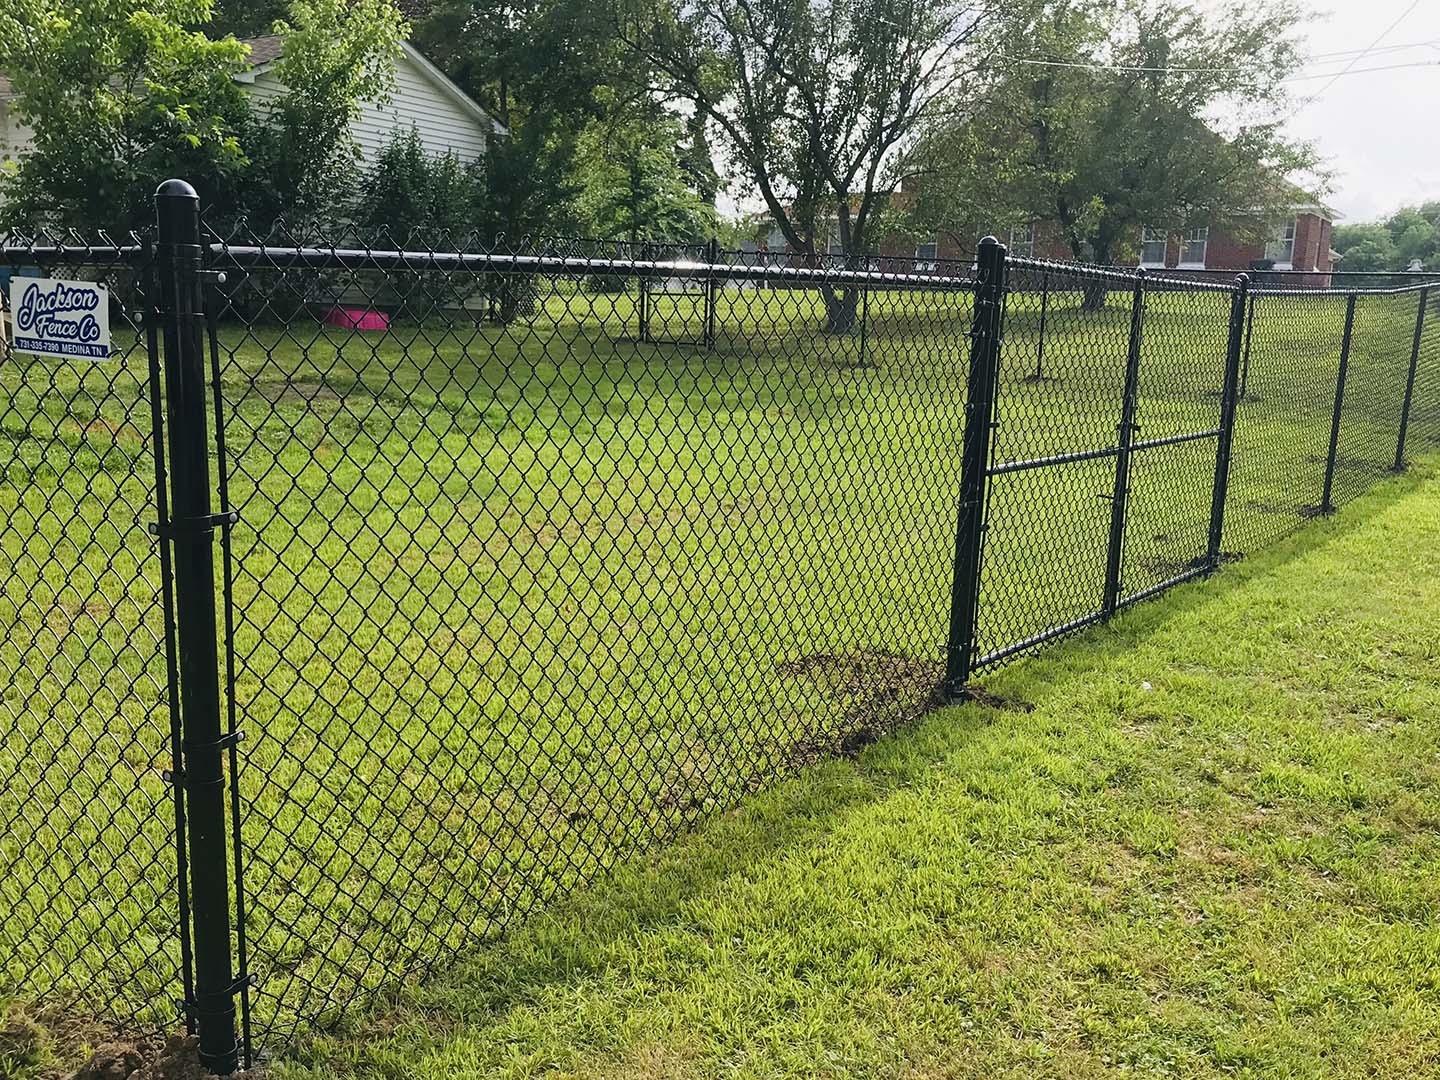  McKenzie Tennessee Fence Project Photo